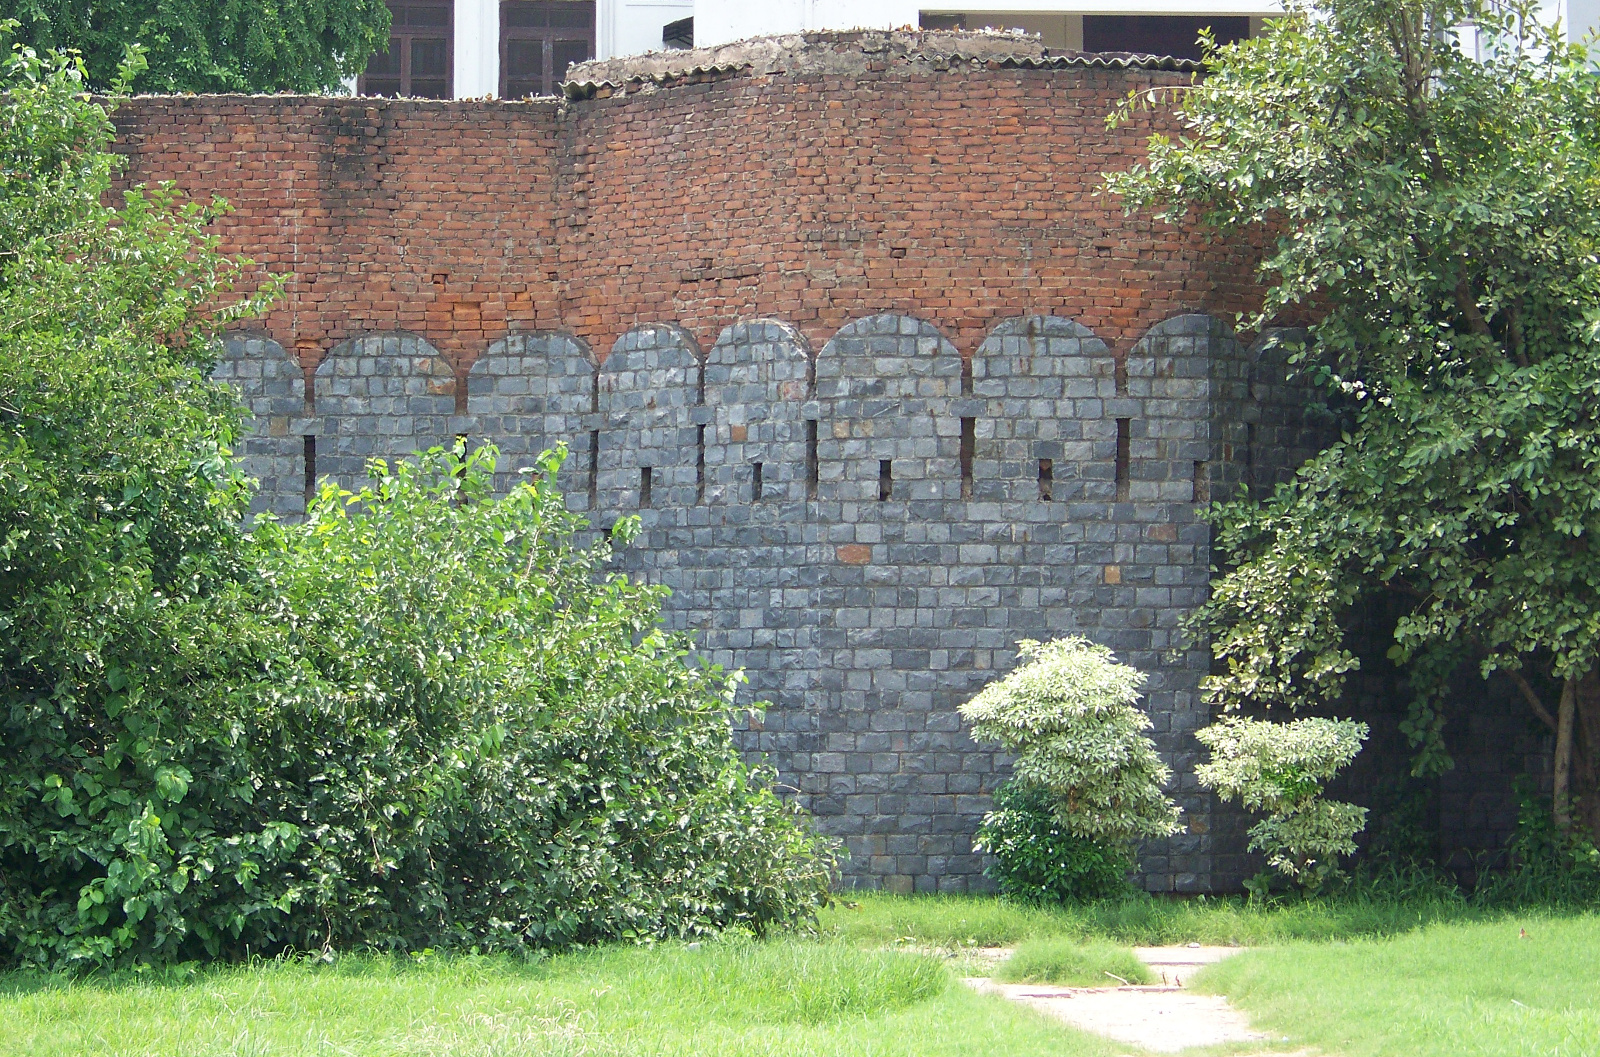 Remaining city wall serving as a retaining wall.